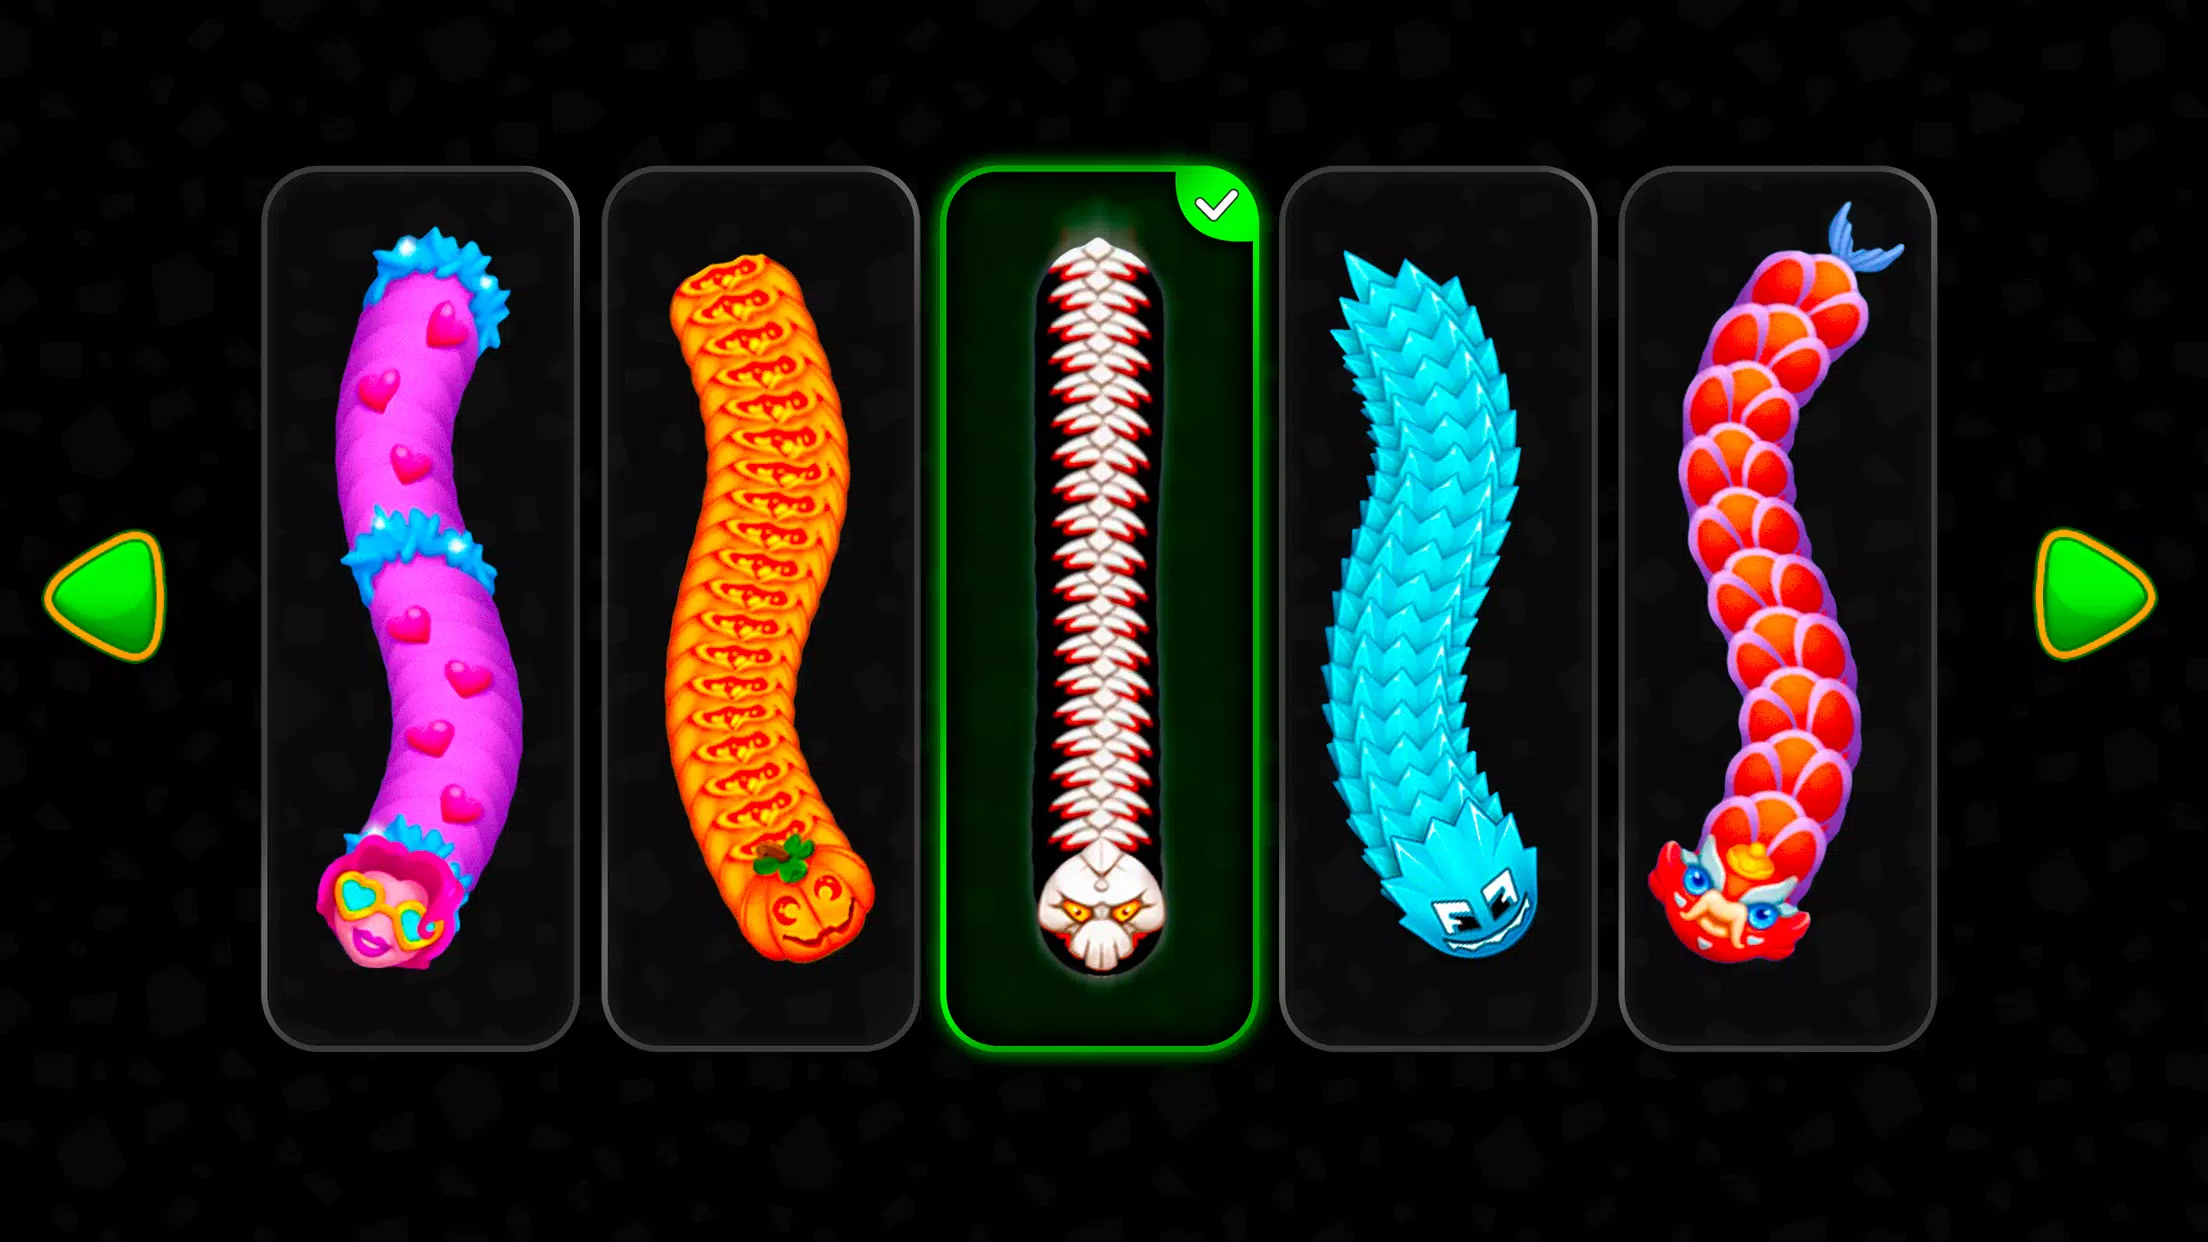 Worms Zone .io - Hungry Snake 1.3.4 (134) APK Download by CASUAL